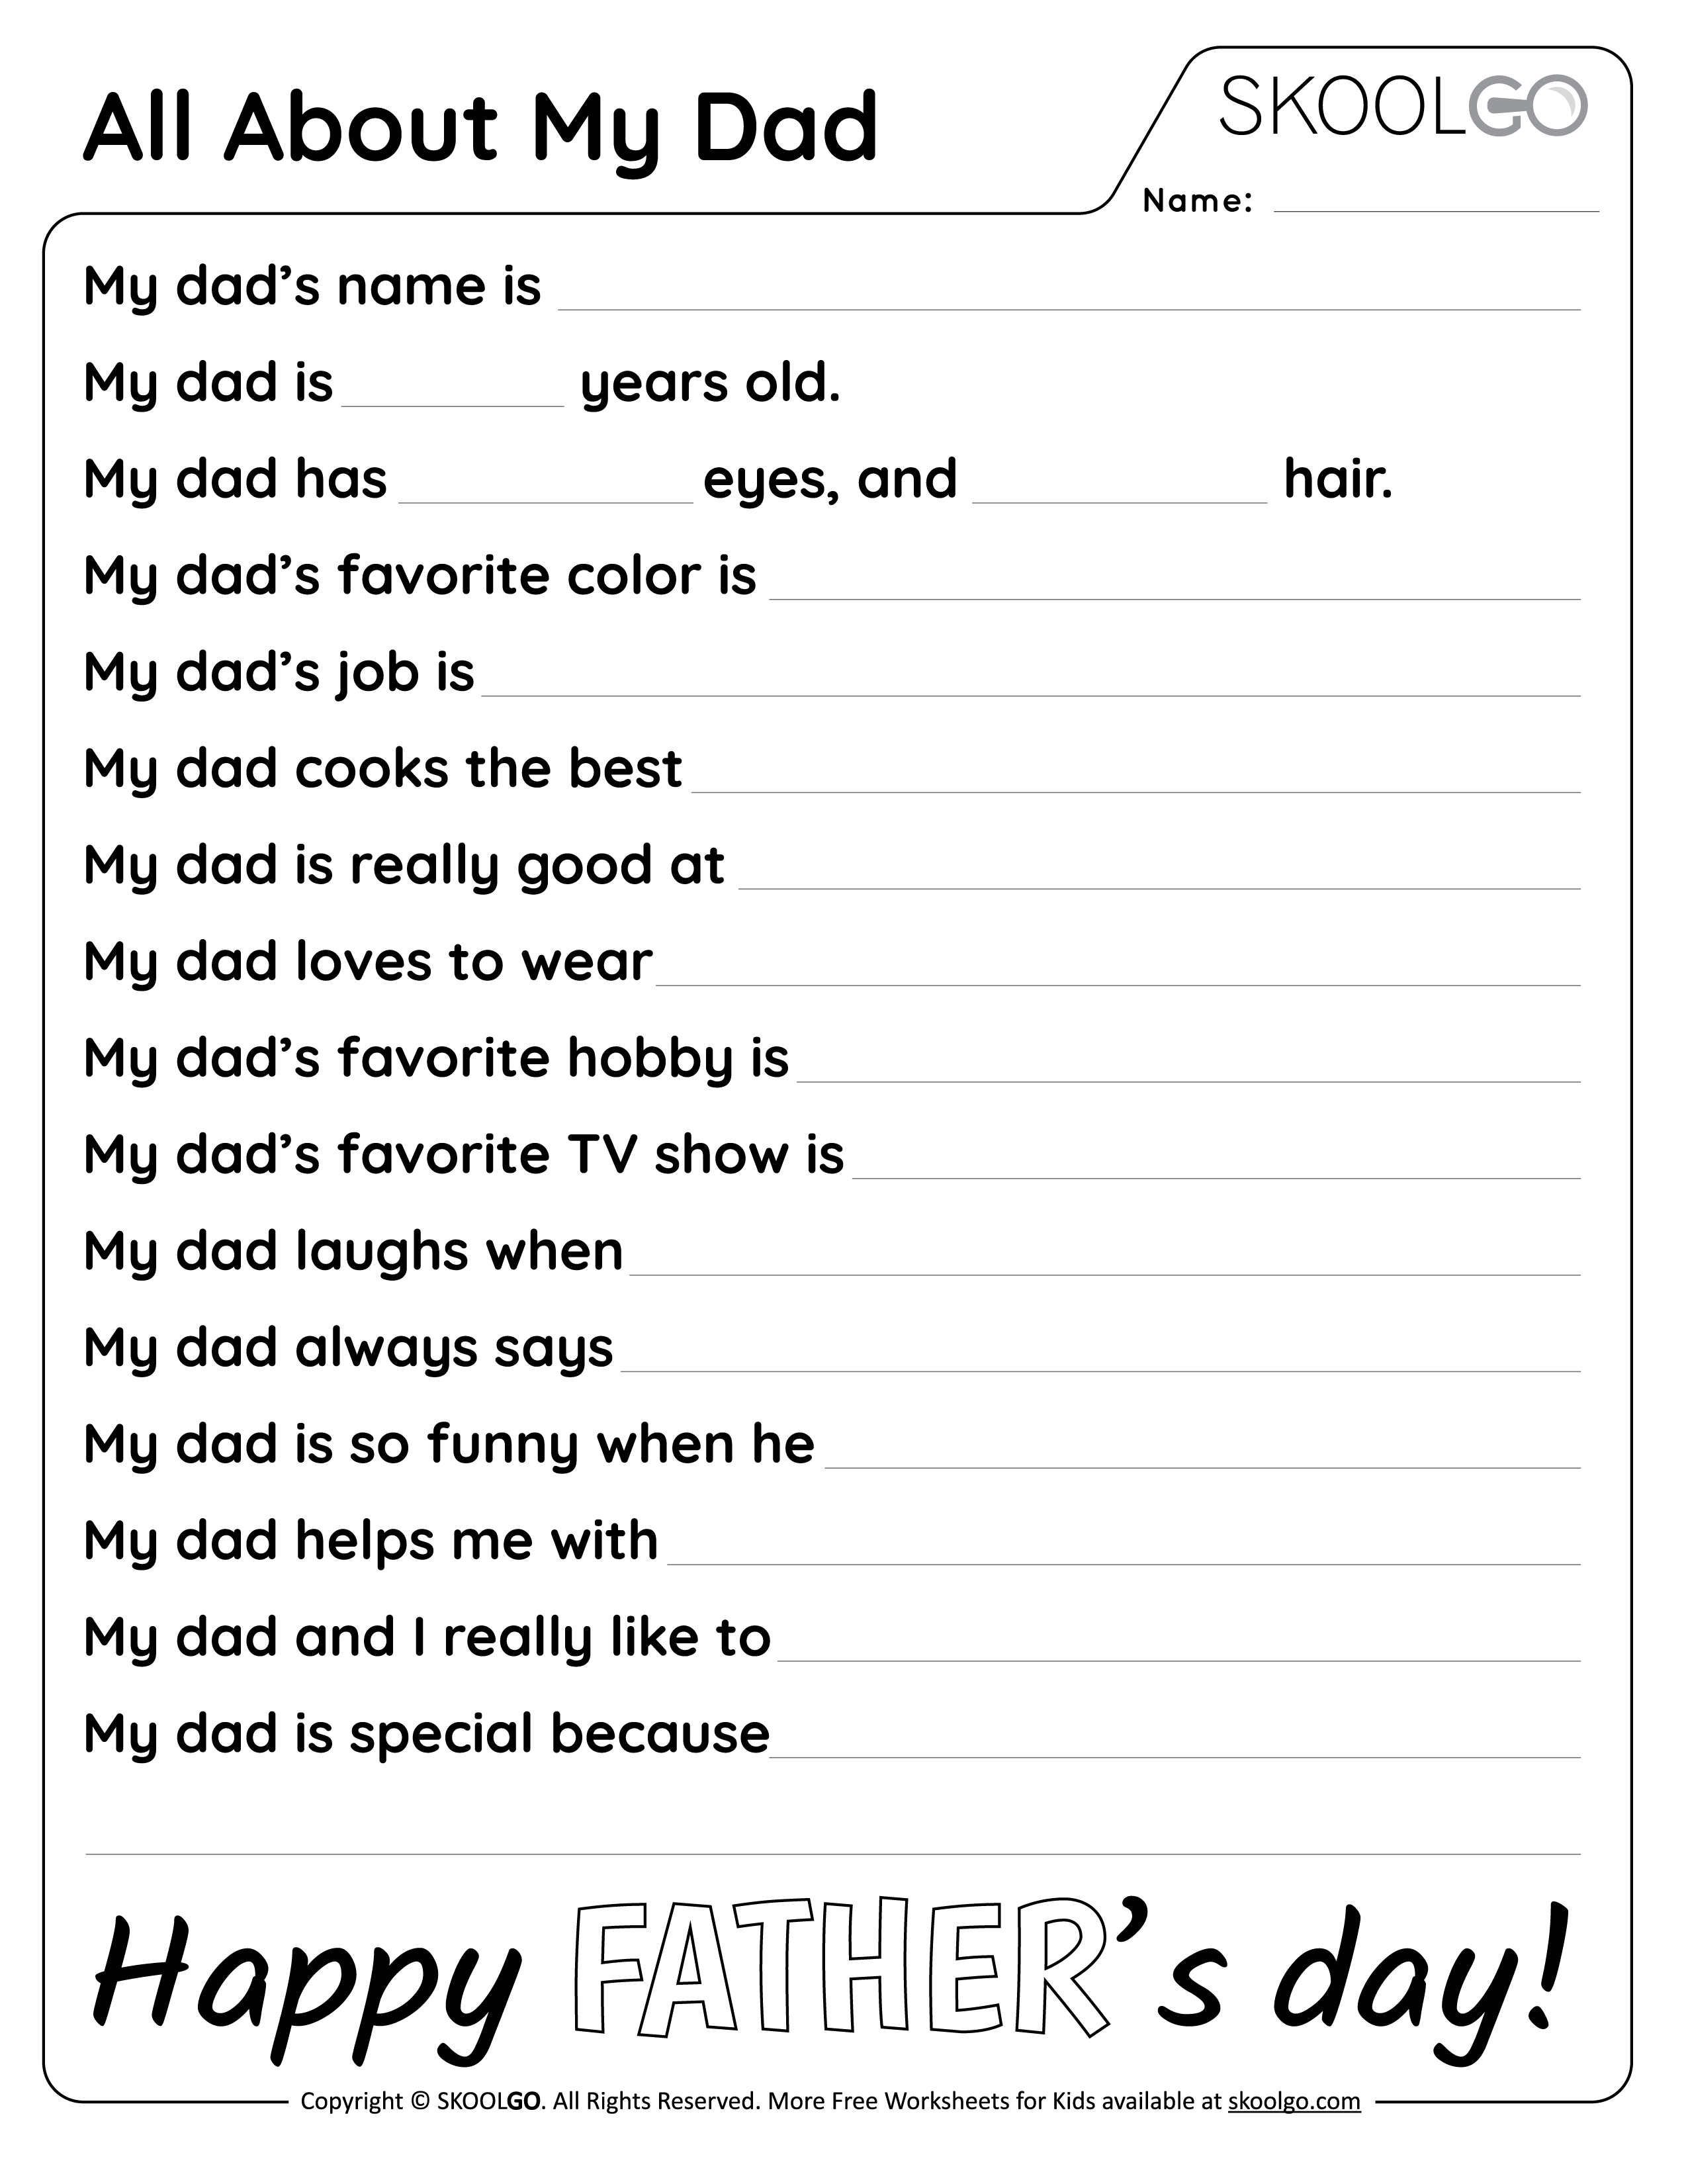 All About My Dad 1 - Free Worksheet for Kids - Black and White